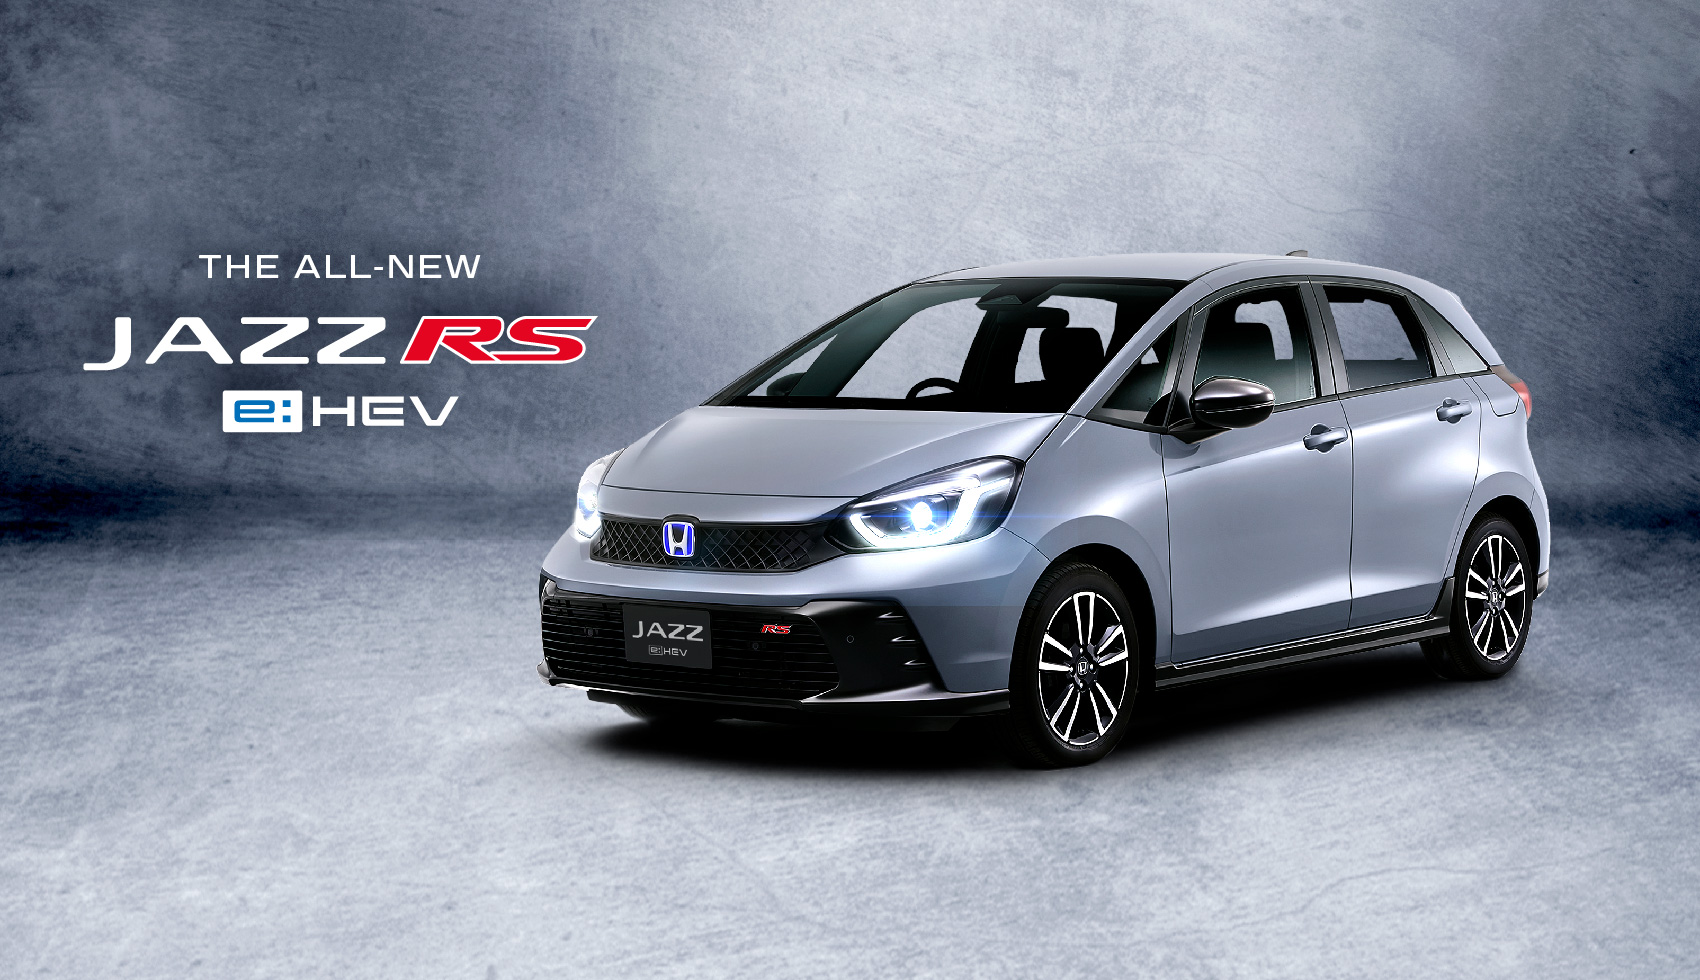 The all-new JAZZ e:HEV RS <br> Limited stock available at discounted price of $229,880